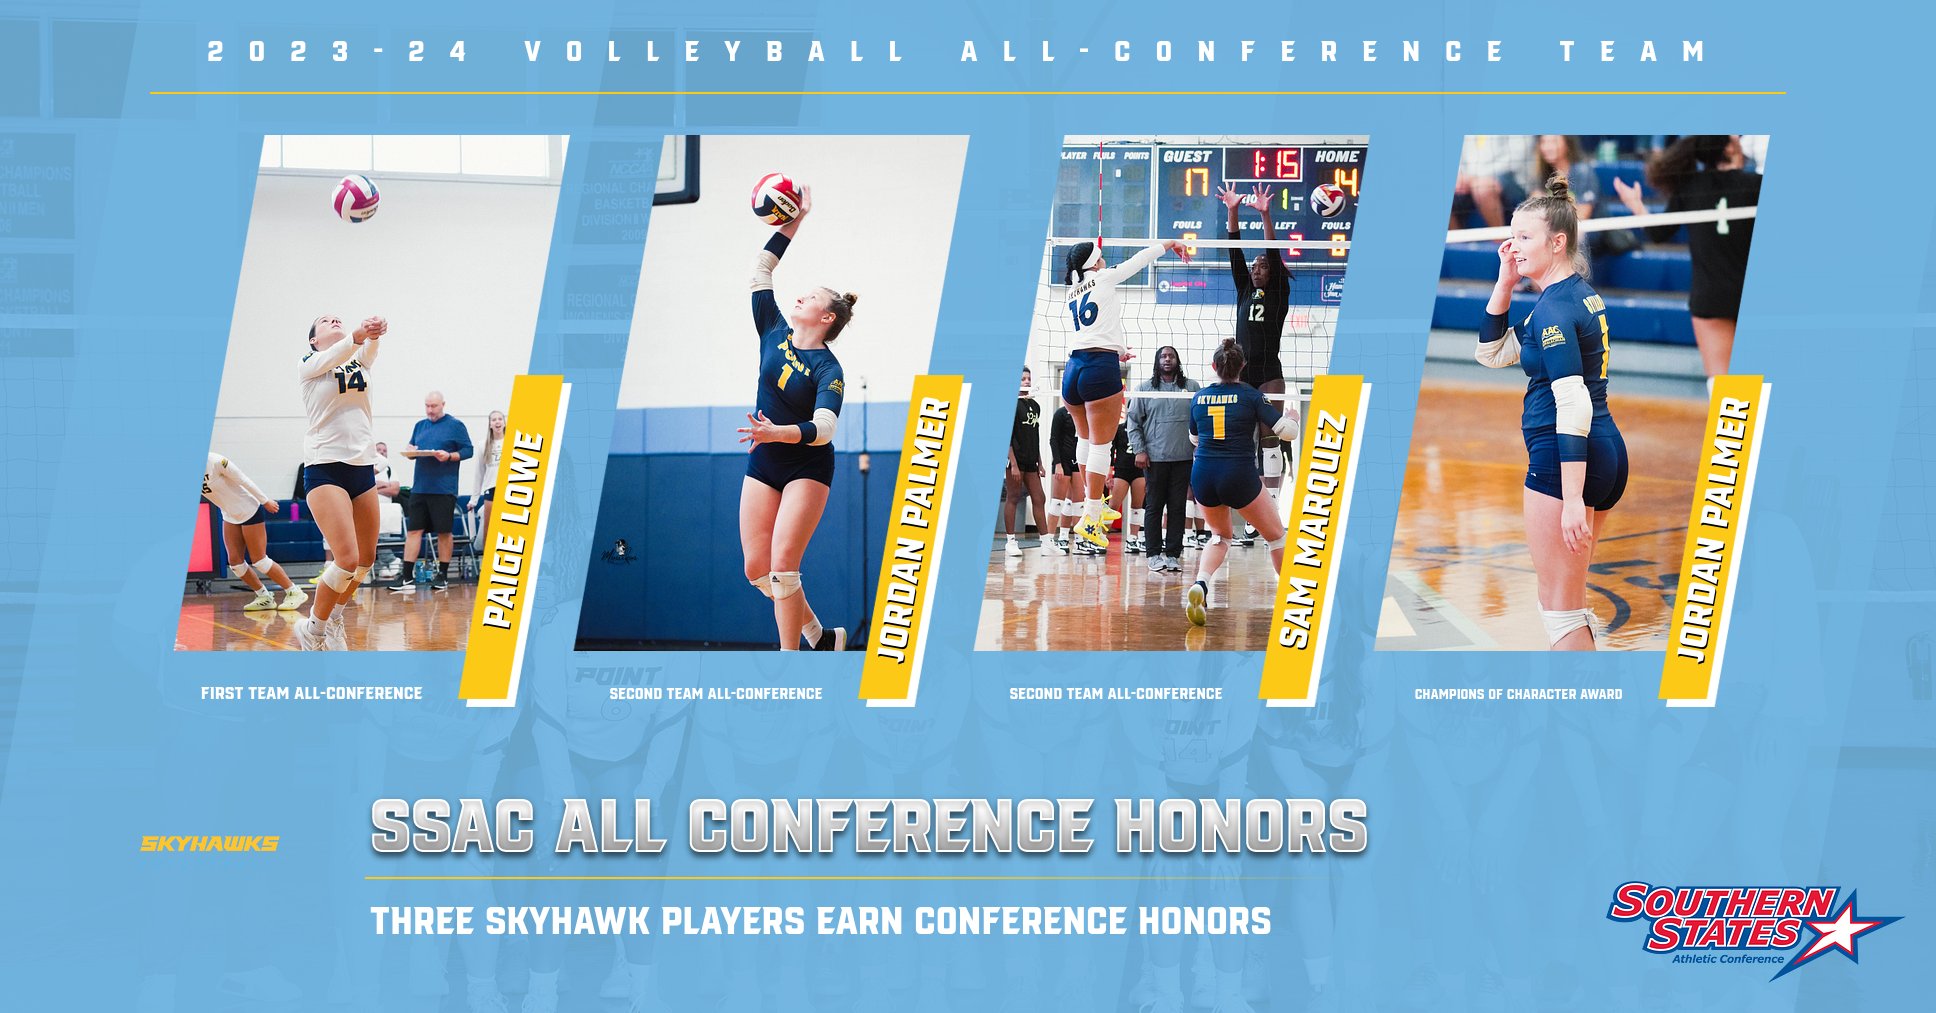 Point Volleyball takes home All-Conference honors